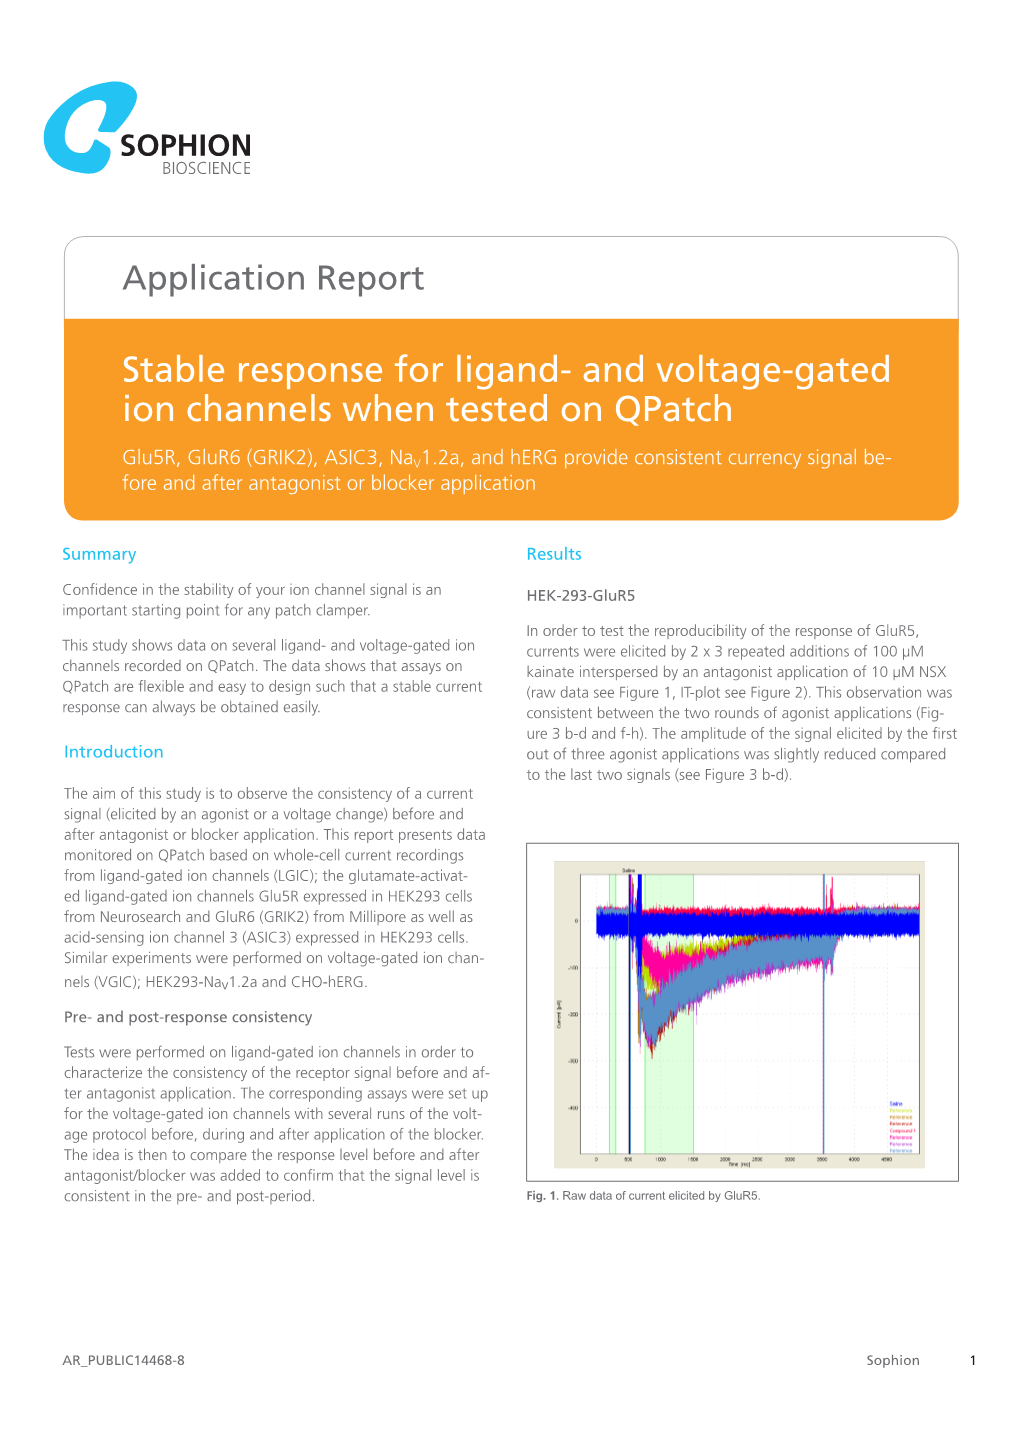 Stable Response for Ligand- and Voltage-Gated Ion Channels When Tested on Qpatch